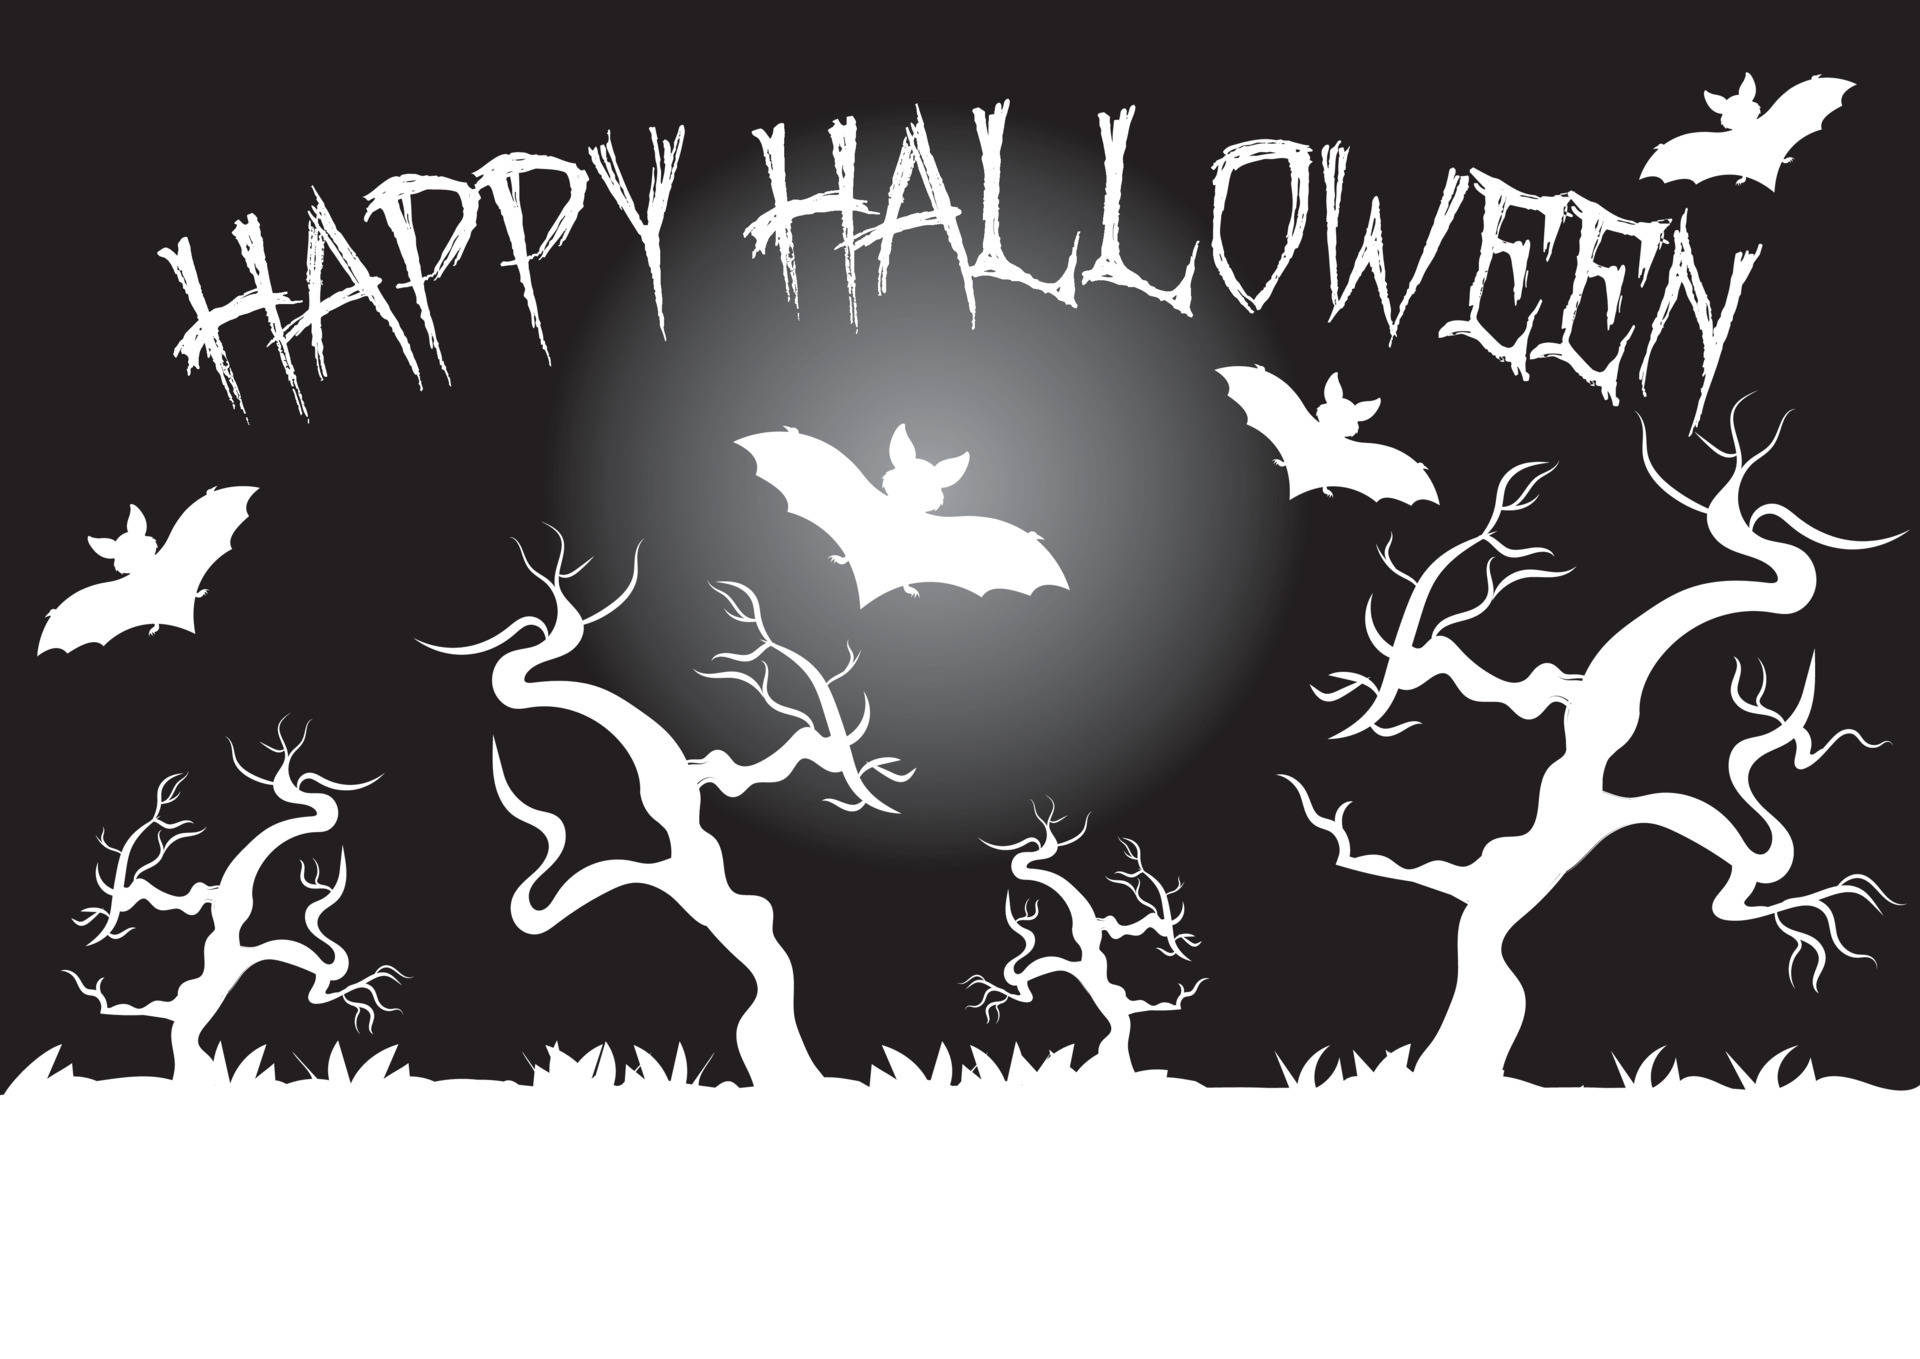 Trick Or Treat! Have A Happy Halloween! Background